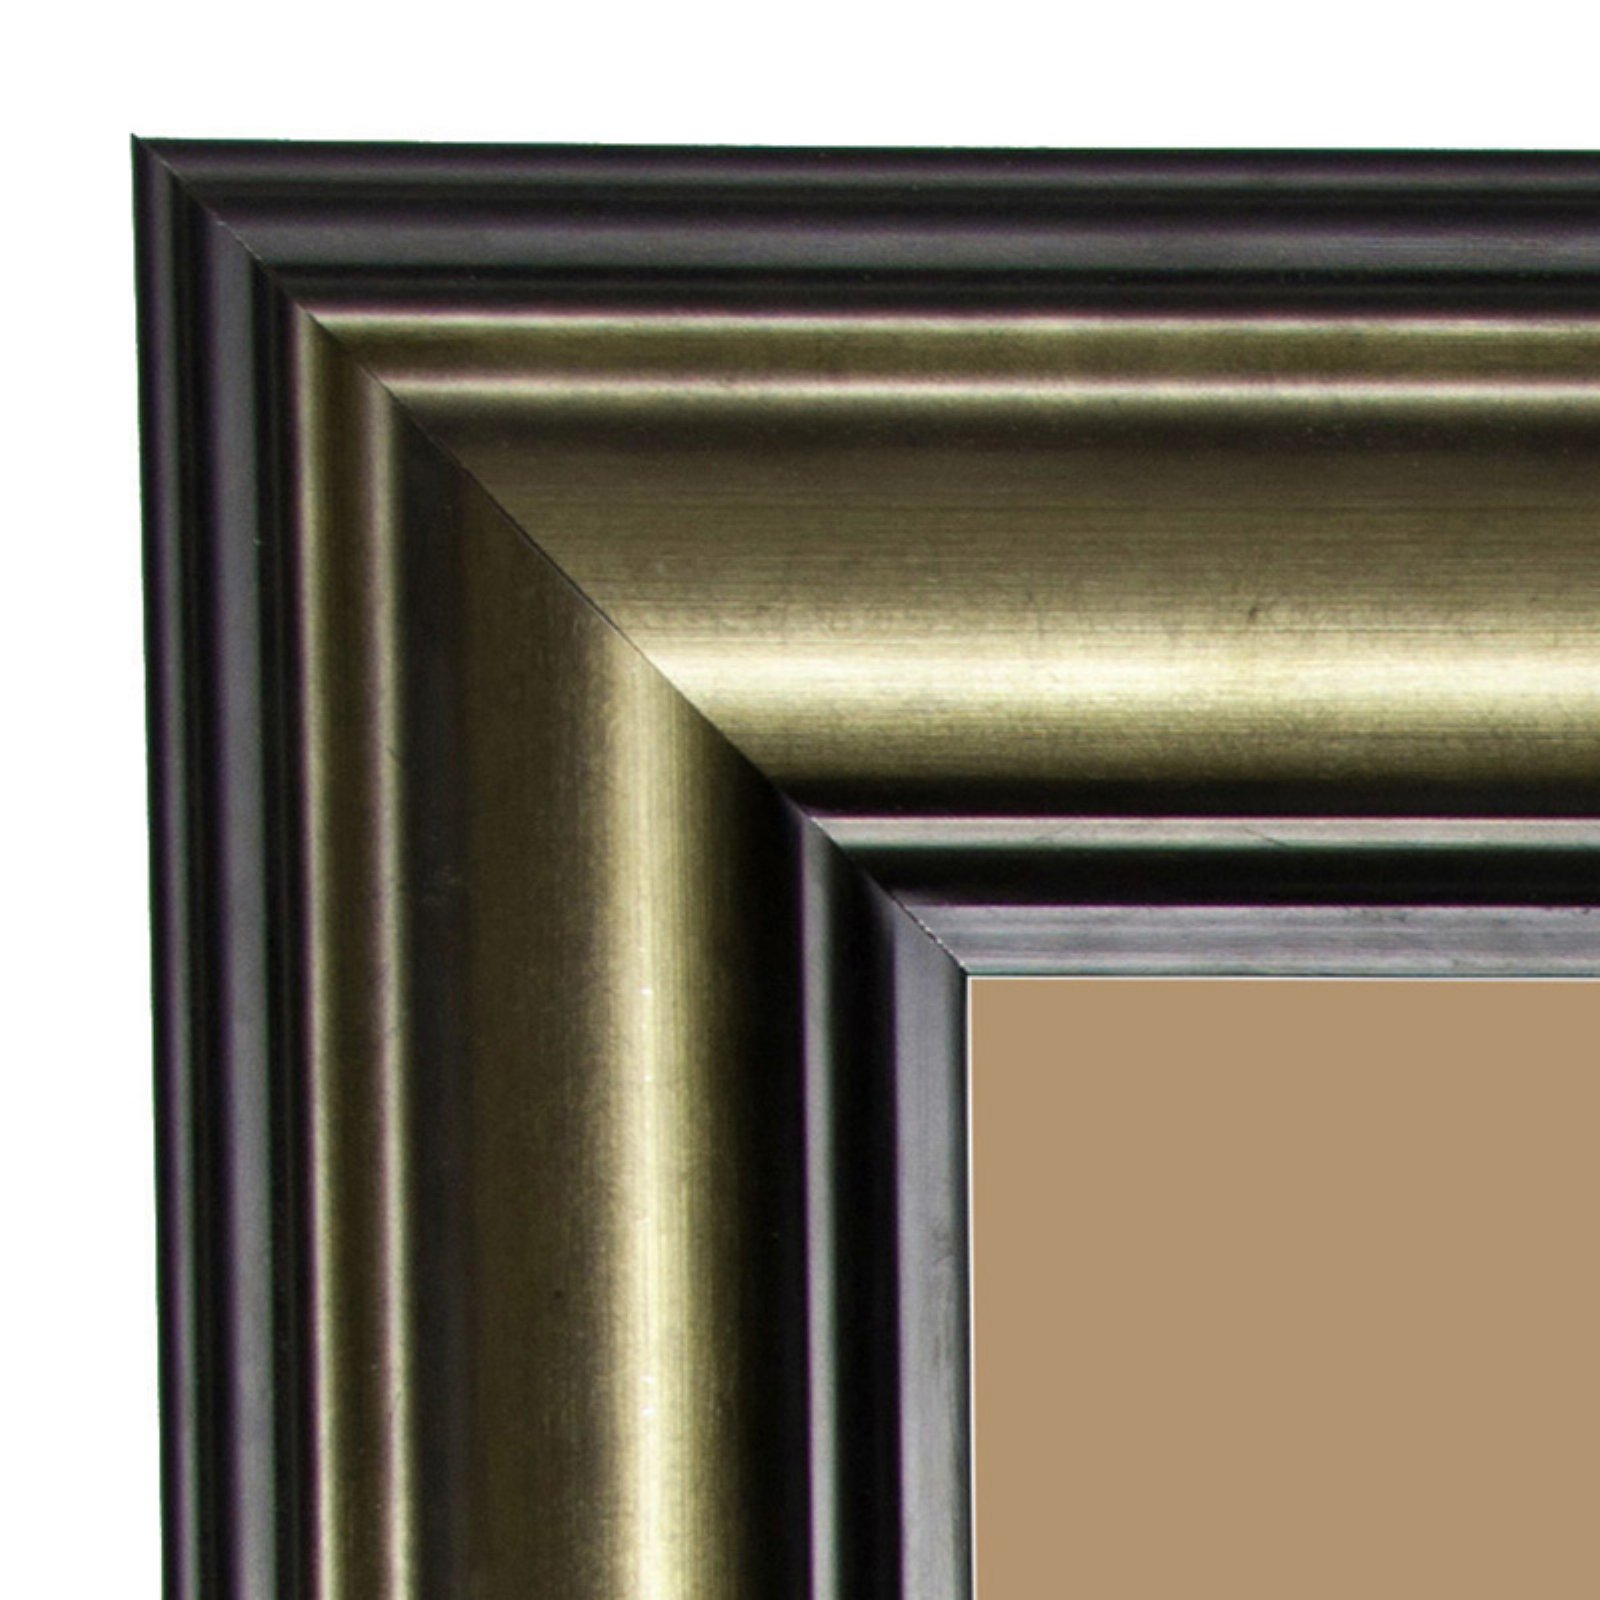 Rayne Mirrors Antique Stepped Frame - image 2 of 2